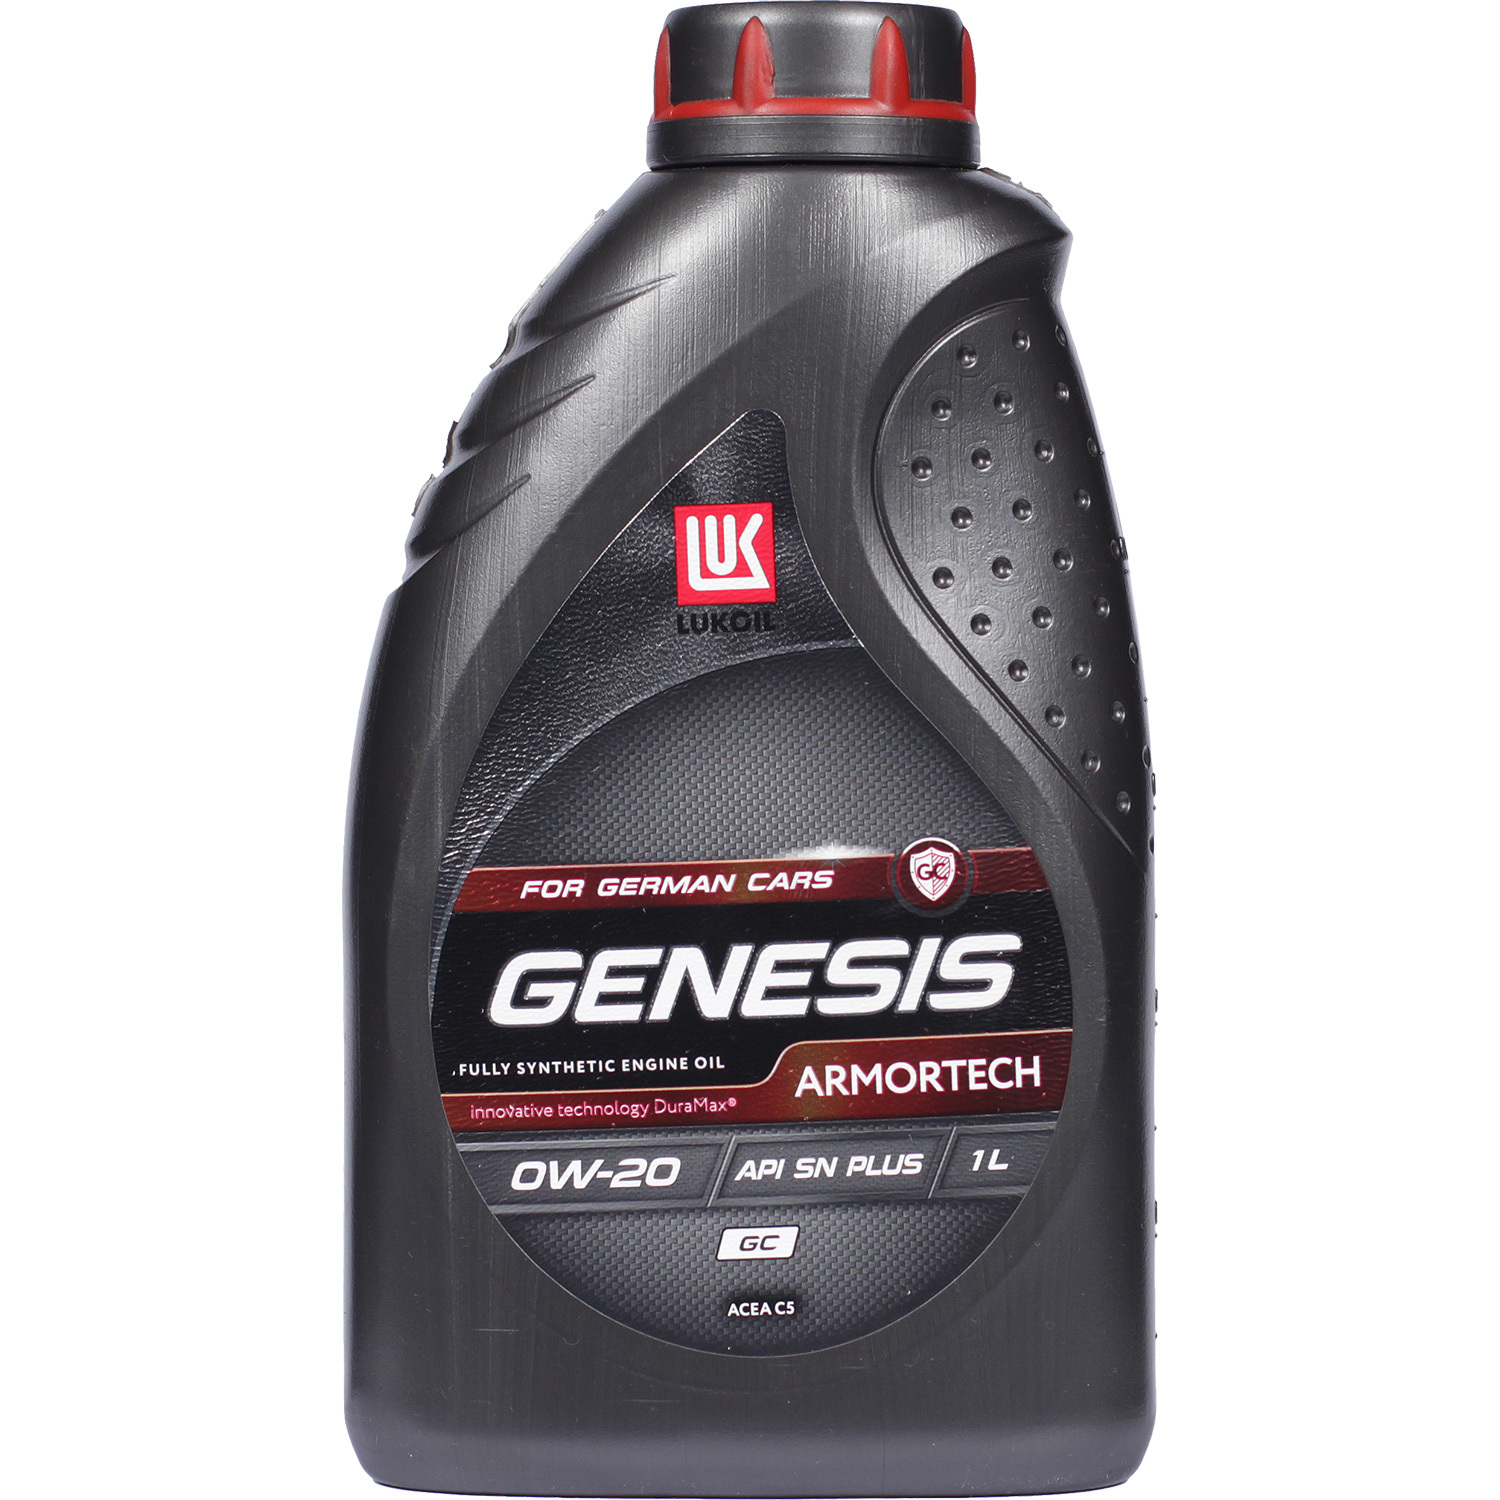 Lukoil Моторное масло Lukoil Genesis Armortech GC 0W-20, 1 л lukoil моторное масло lukoil genesis armortech jp 0w 20 1 л